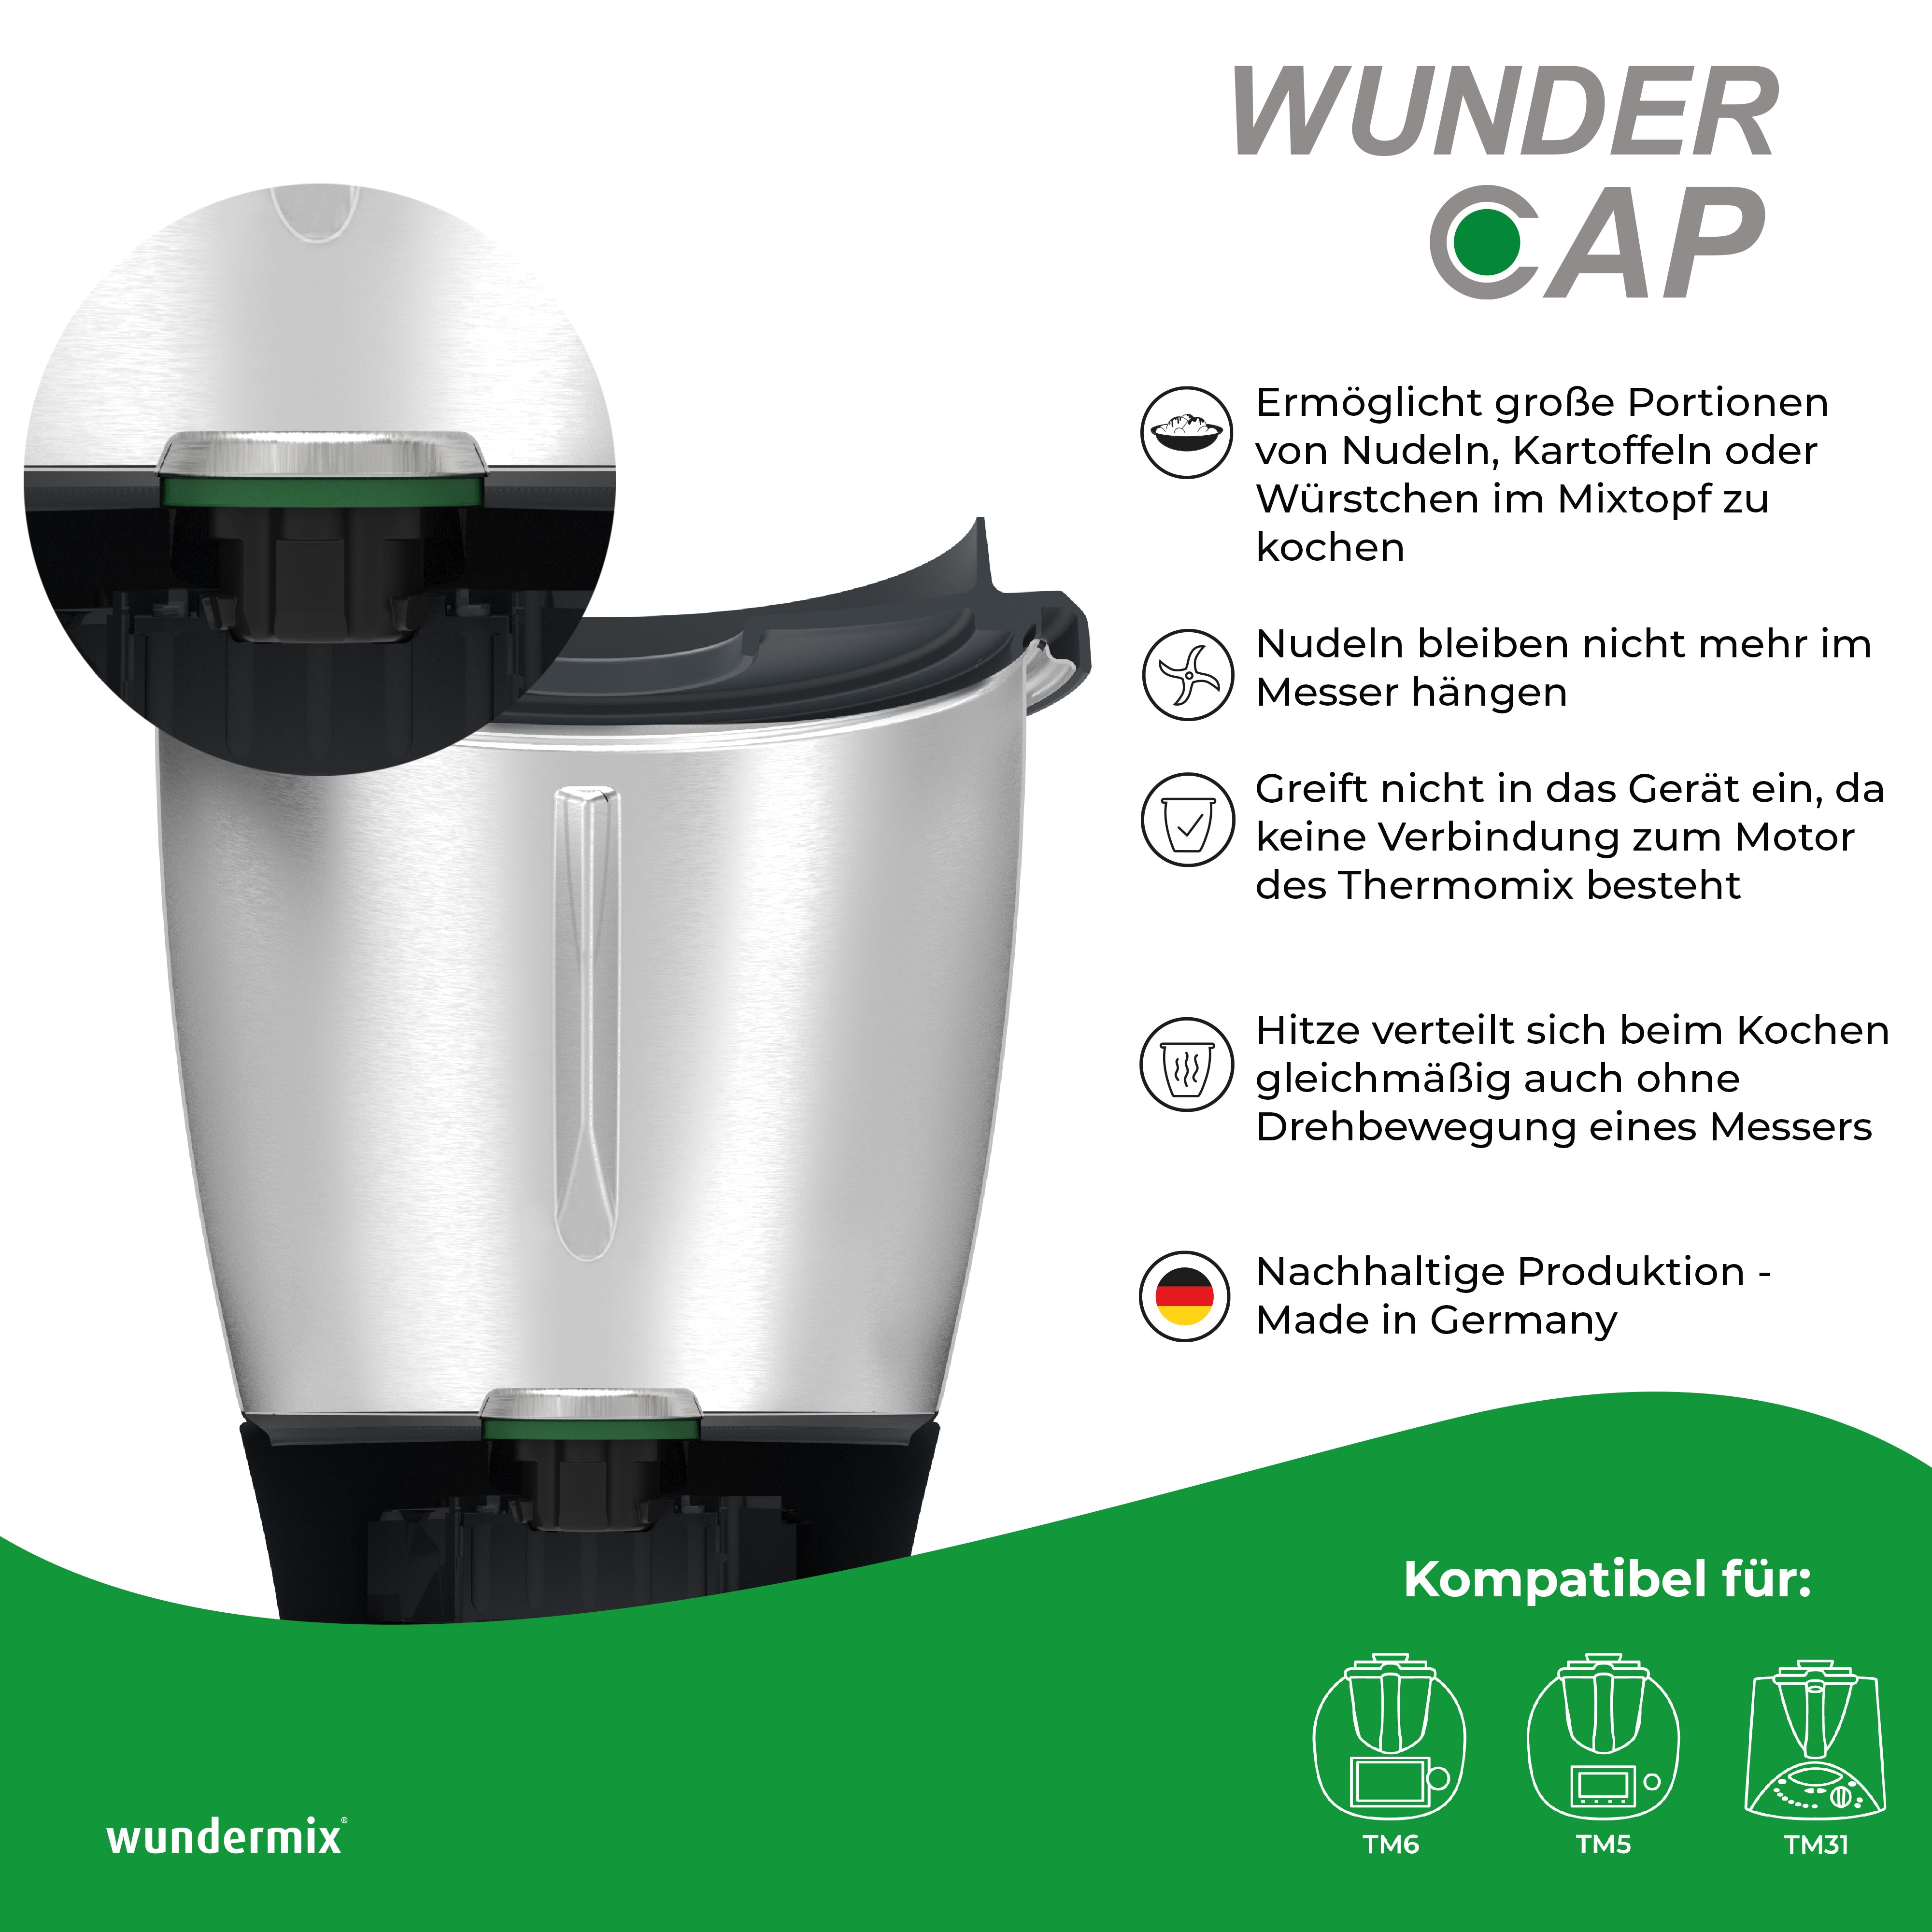 WunderCap® | The revolutionary Thermomix knife replacement